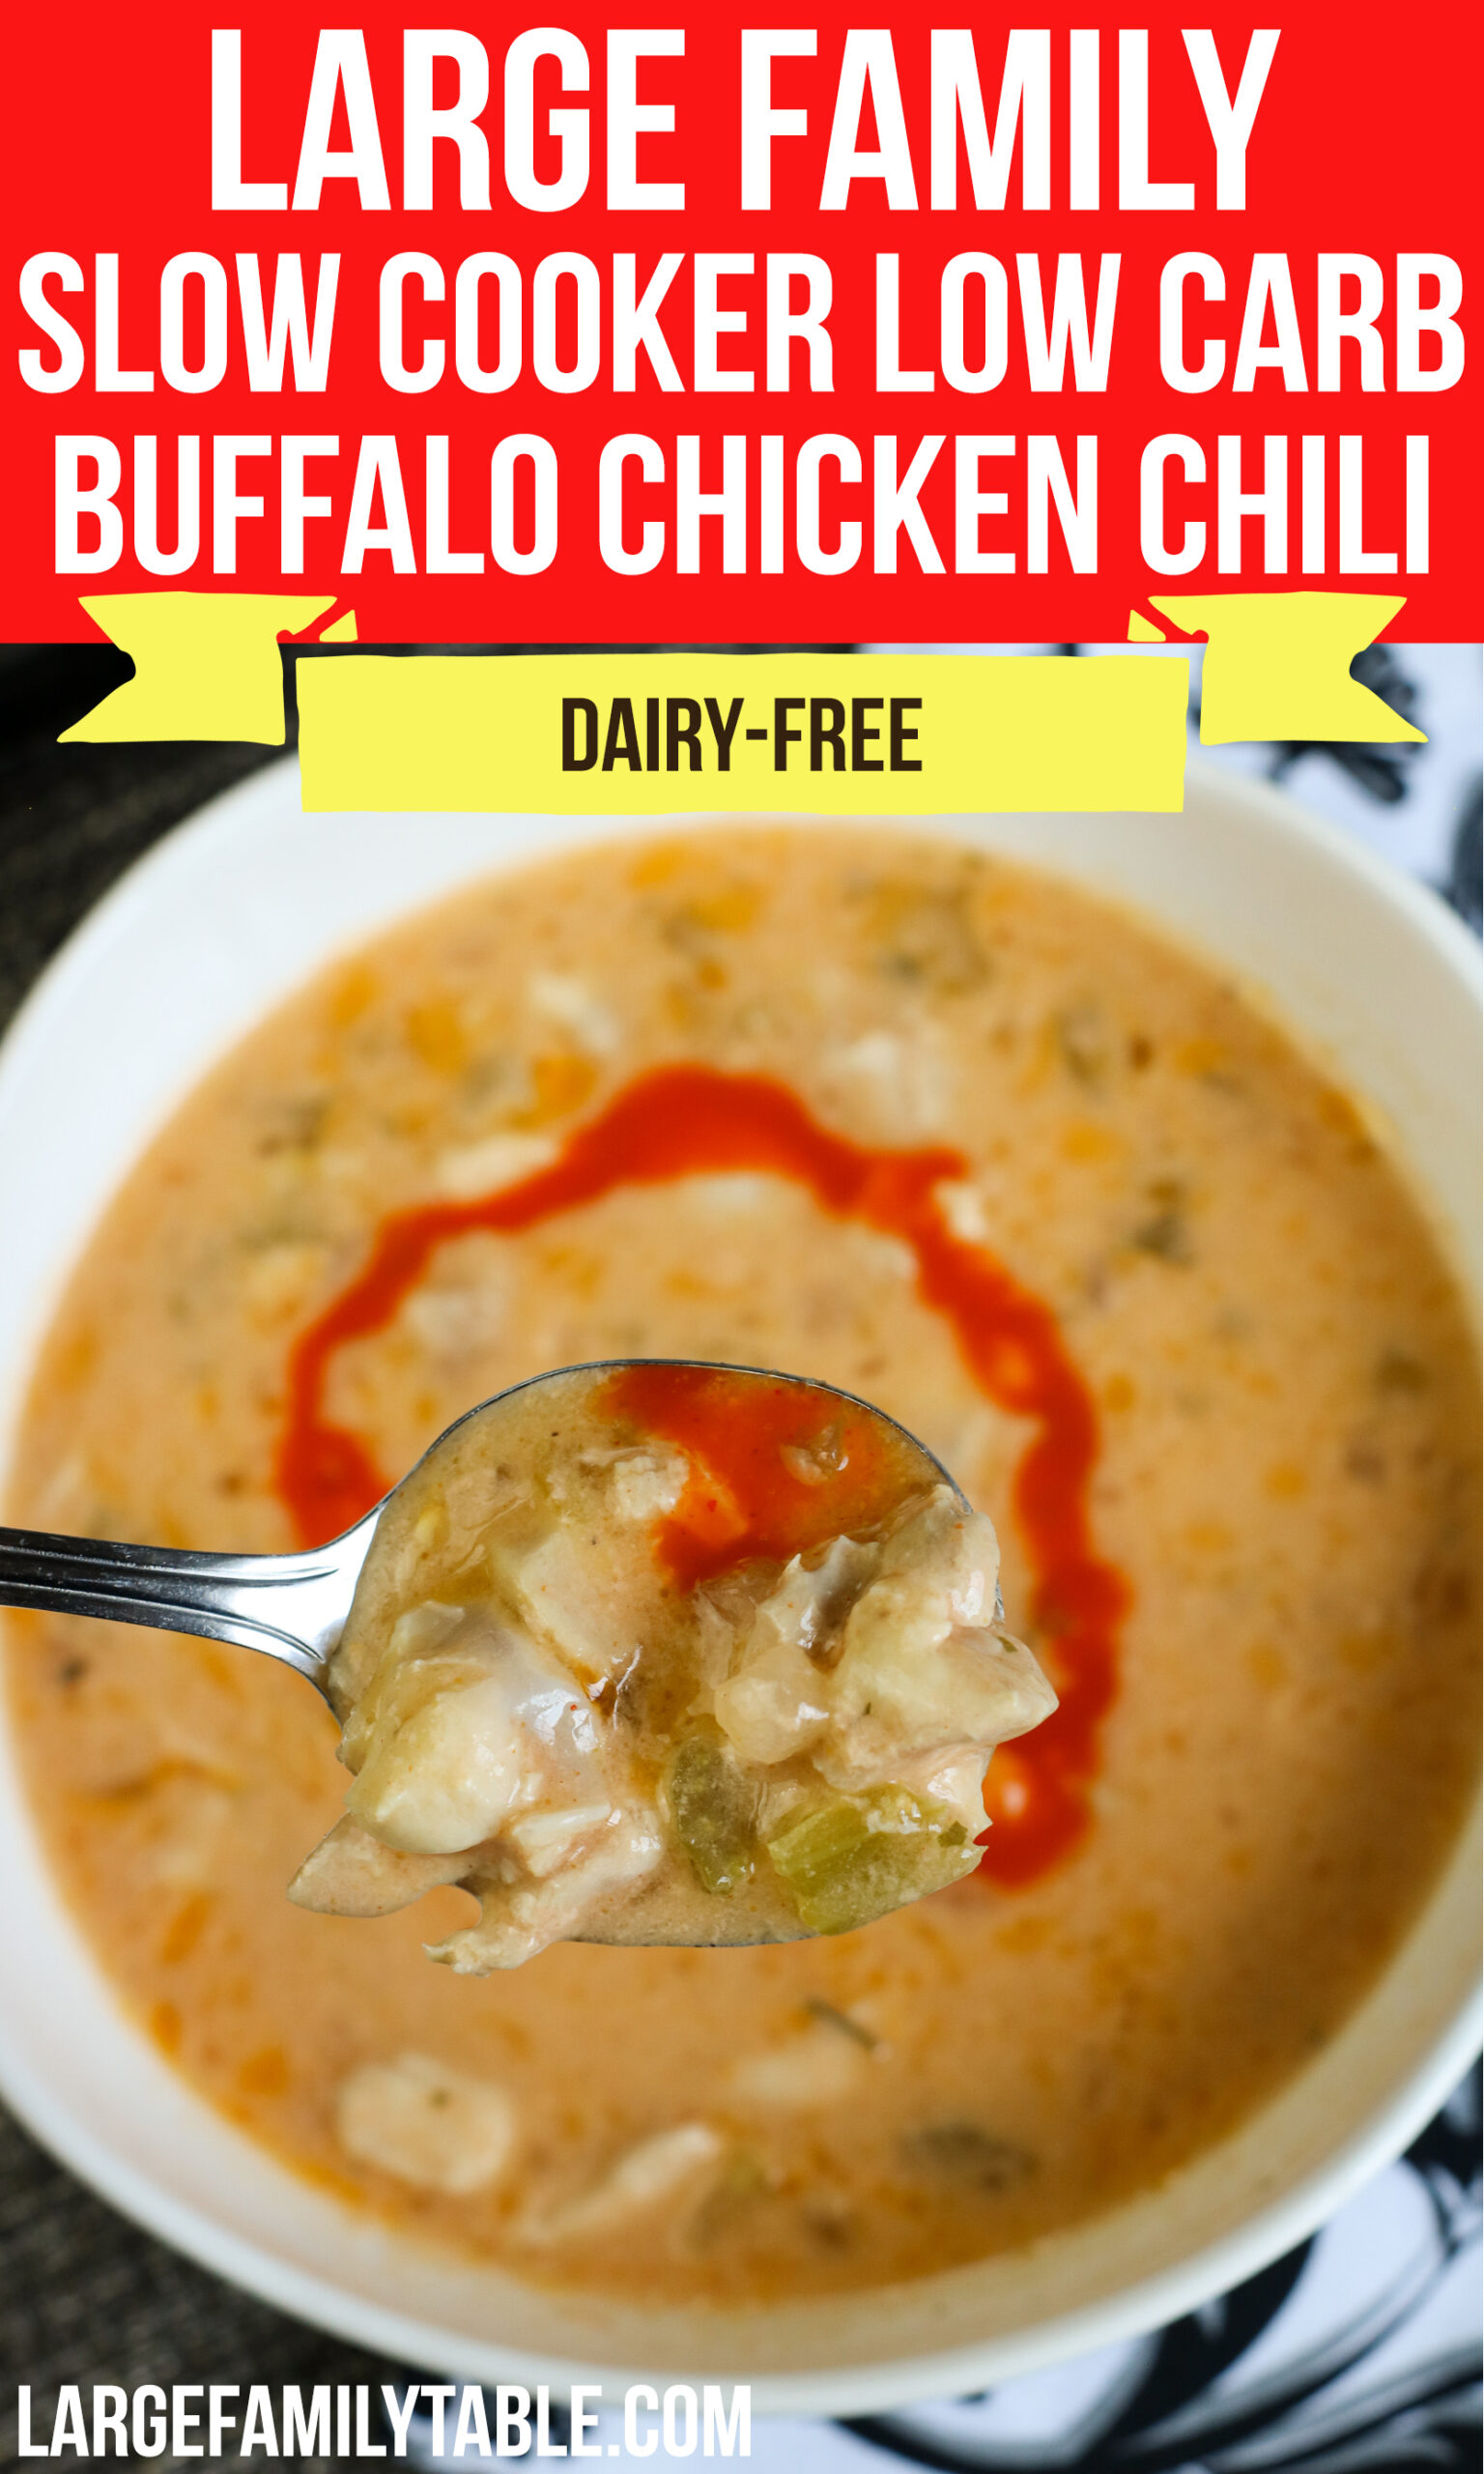 Large Family Slow Cooker Low Carb Buffalo Chicken Chili